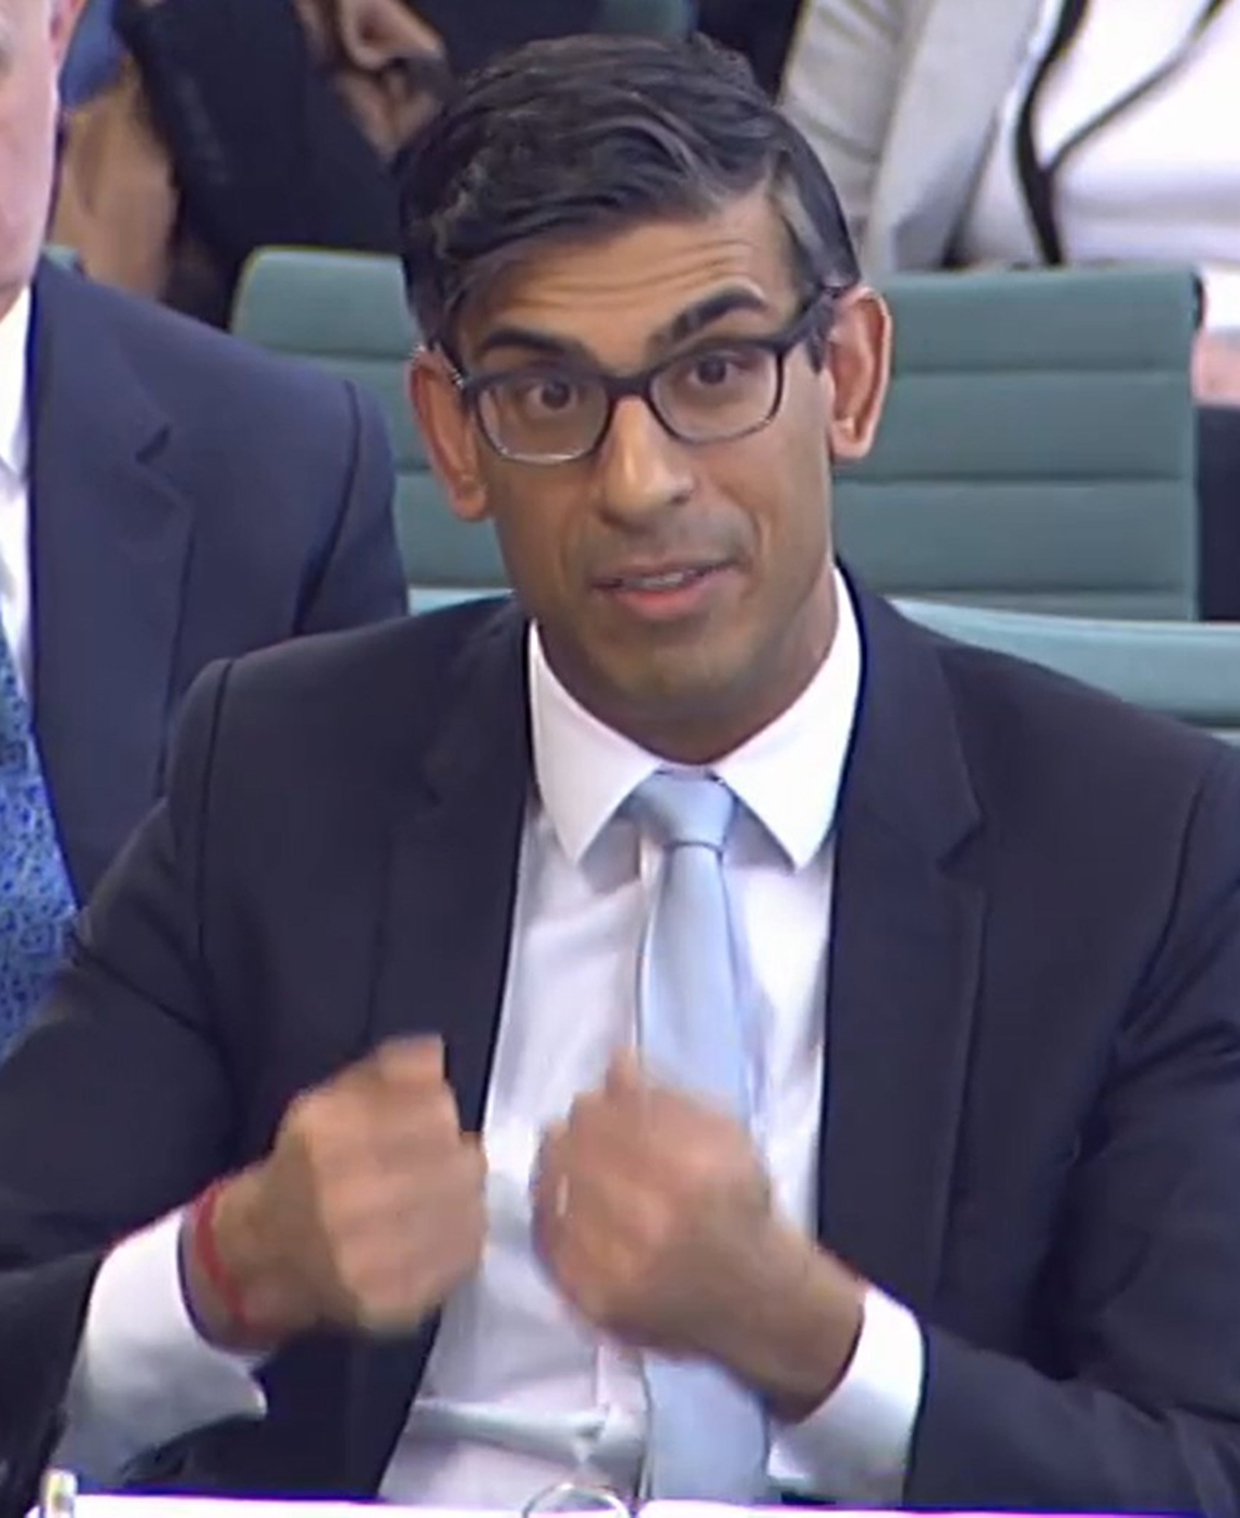 Rishi Sunak slams teaching unions threatening to disrupt exams this summer after rejecting ‘insulting’ pay offer